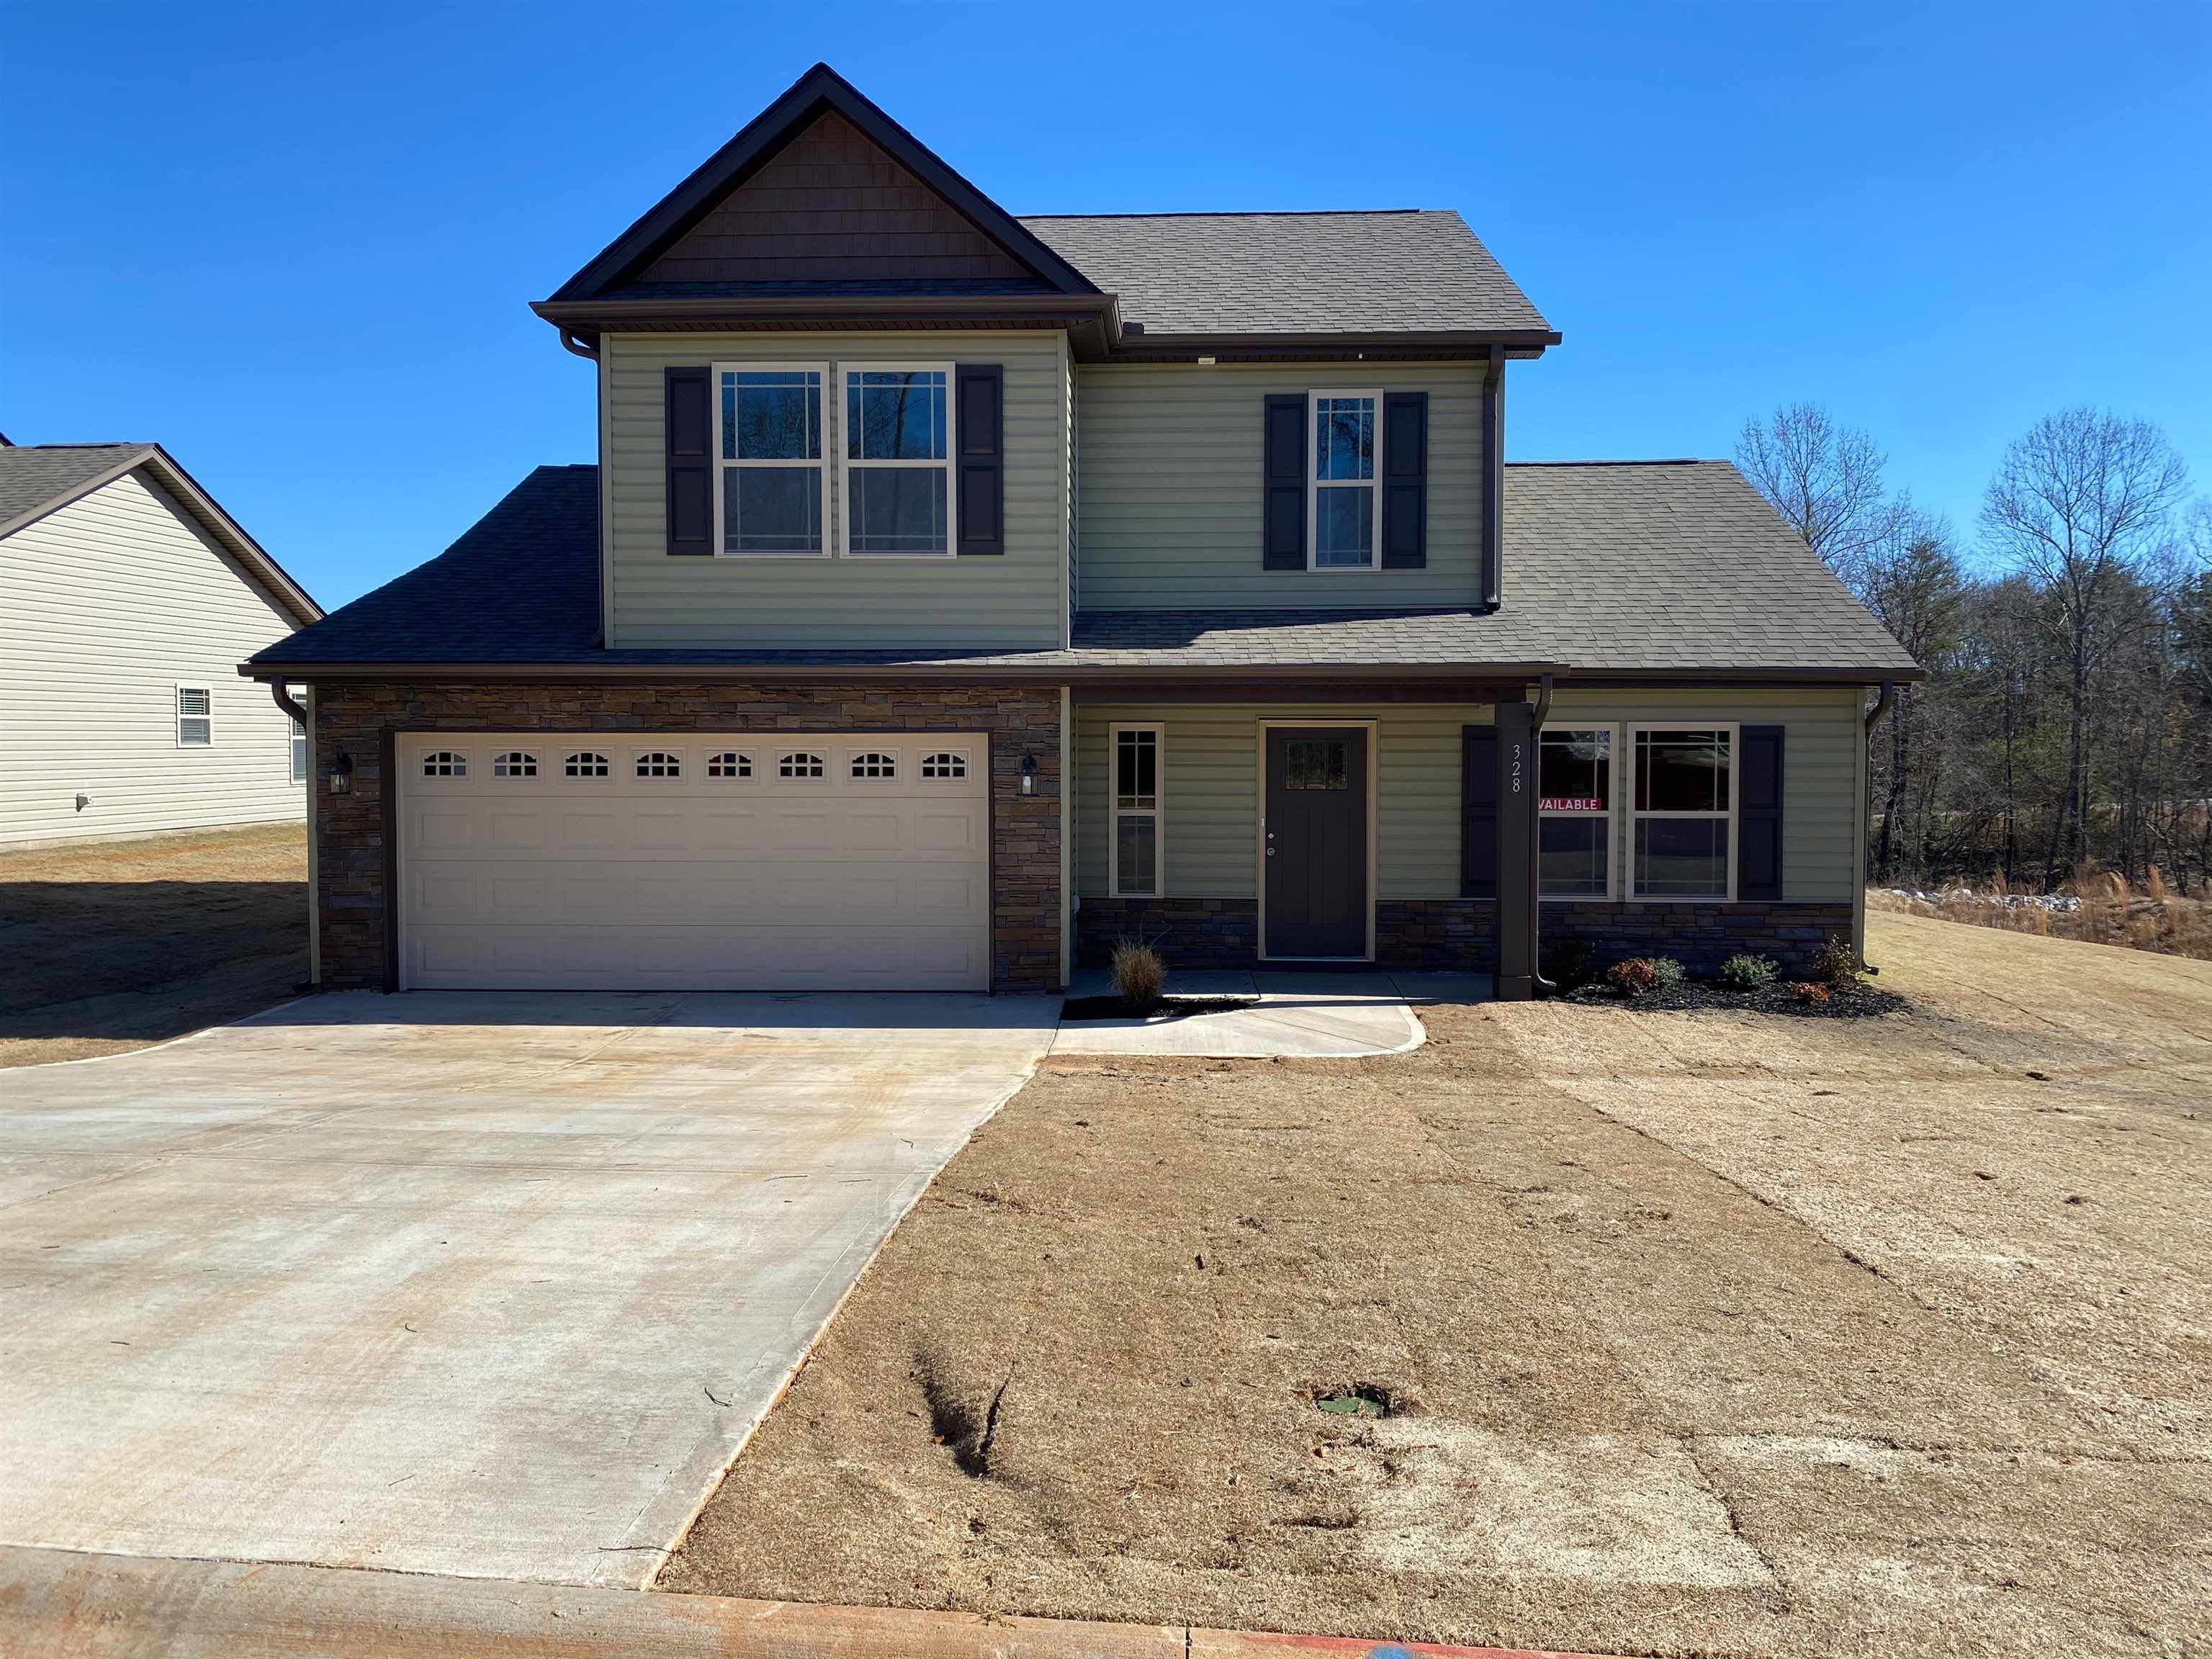 This home features 3 bedrooms PLUS a bonus room. The cozy living area features a gas log fireplace and is open into the kitchen/dining space. Out back is a large covered patio overlooking the huge yard. Lot 20. Preferred Lender/Attorney Closing Costs Incentive Offered!